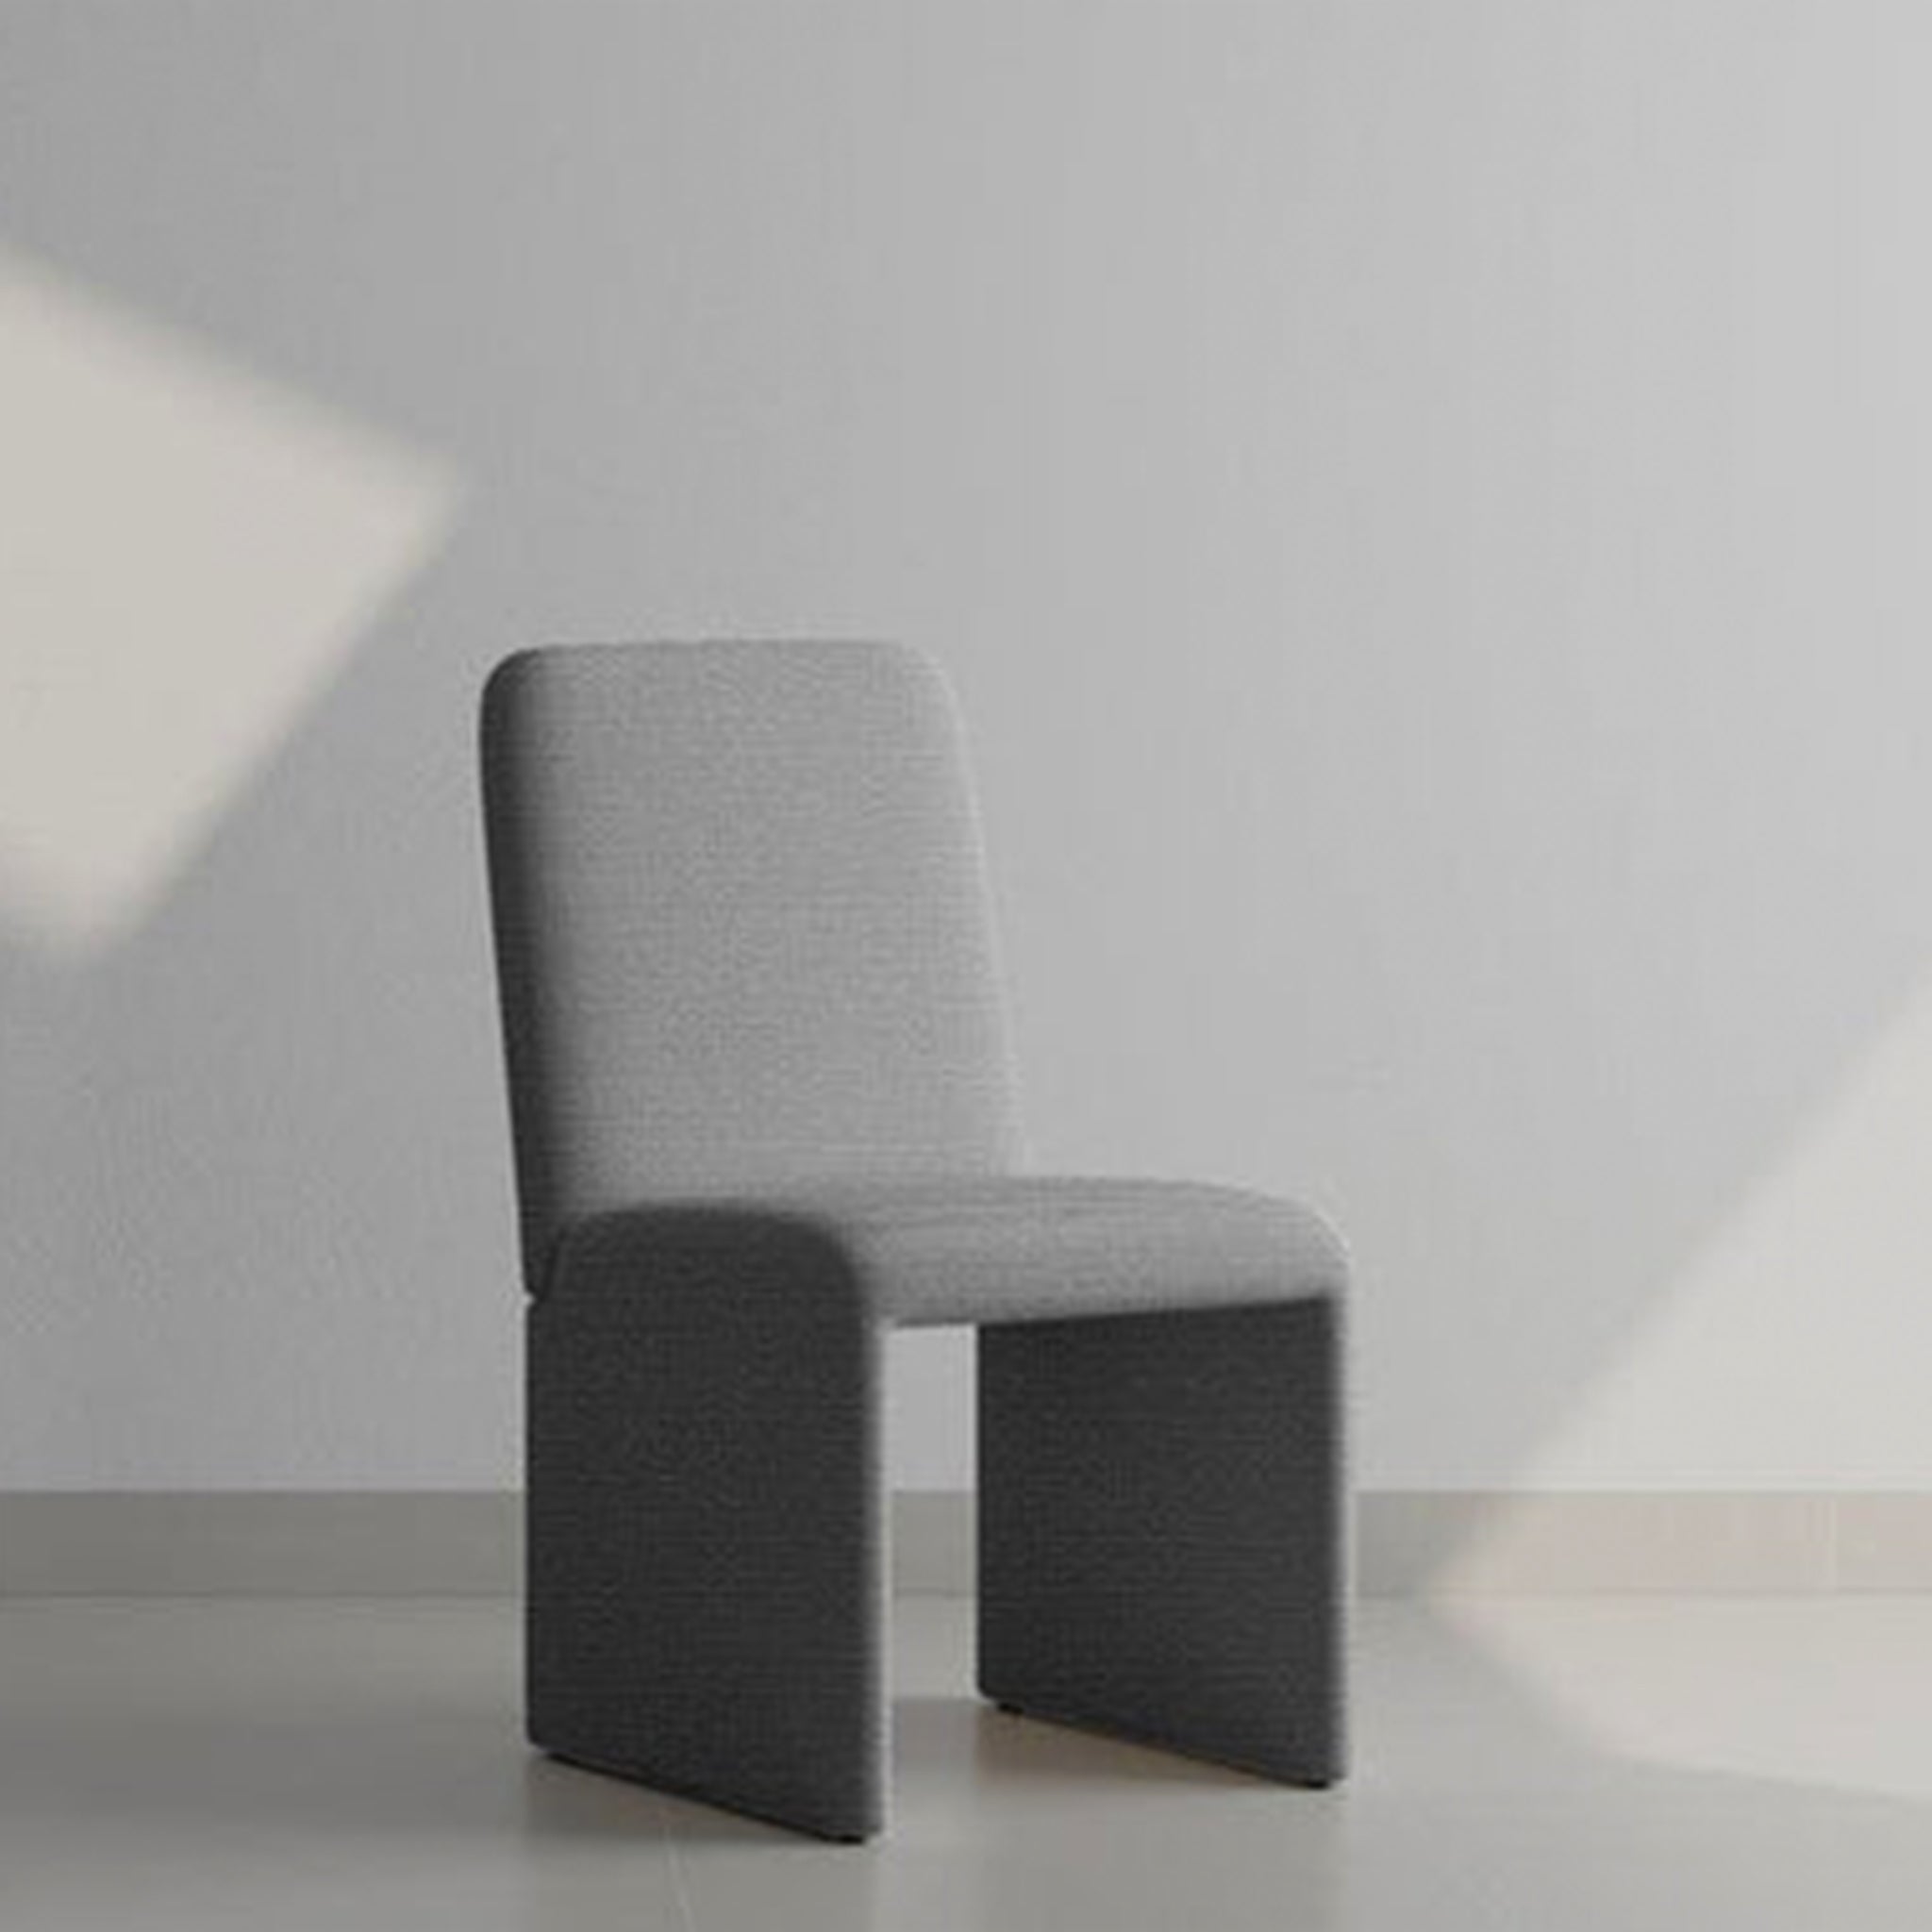 The Carl Chair in off-white upholstery with minimalist design